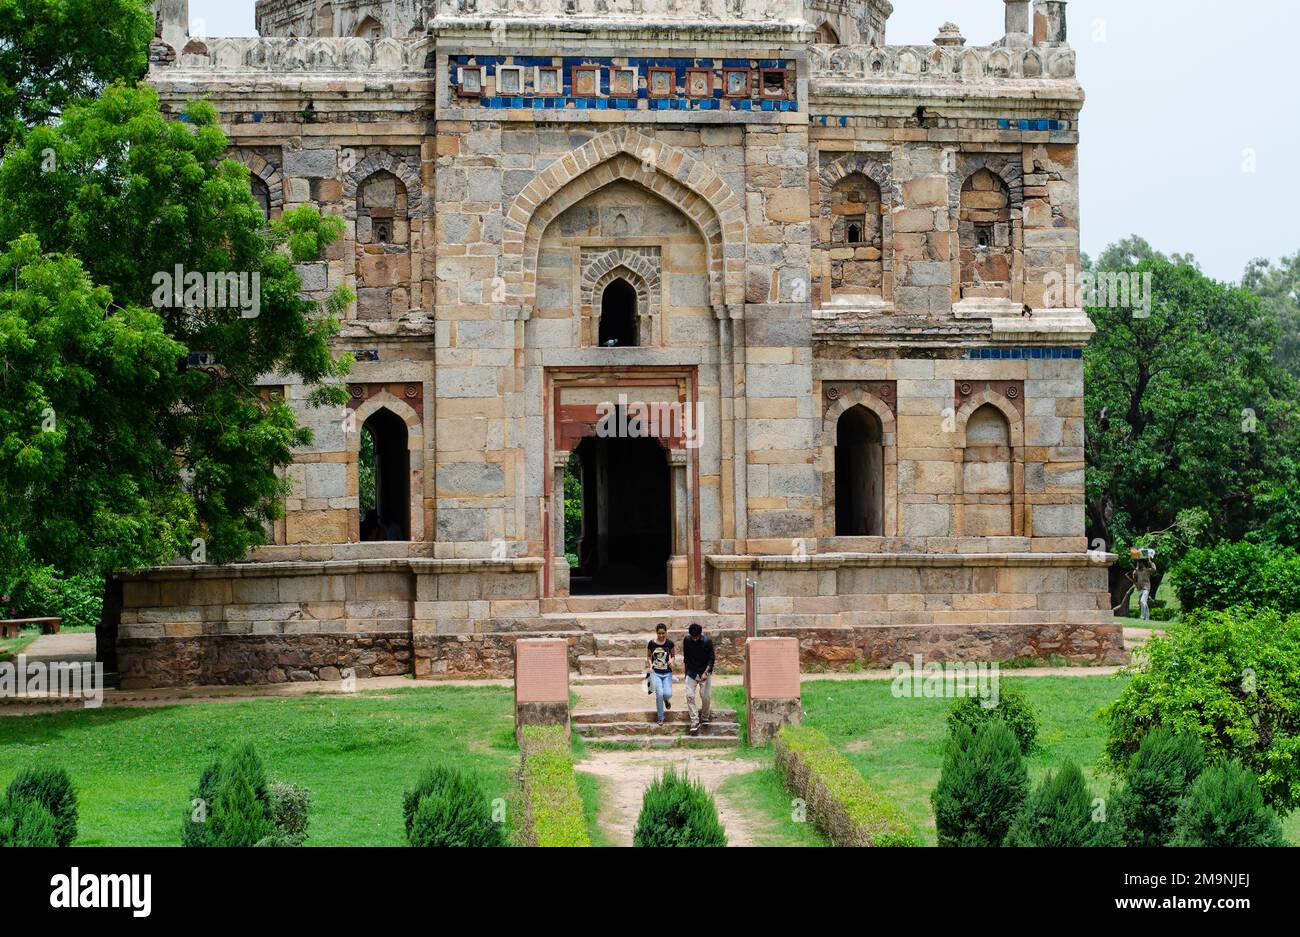 The bara gumbad and masjid mosque monument in lodhi gardens new delhi india. Stock Photo